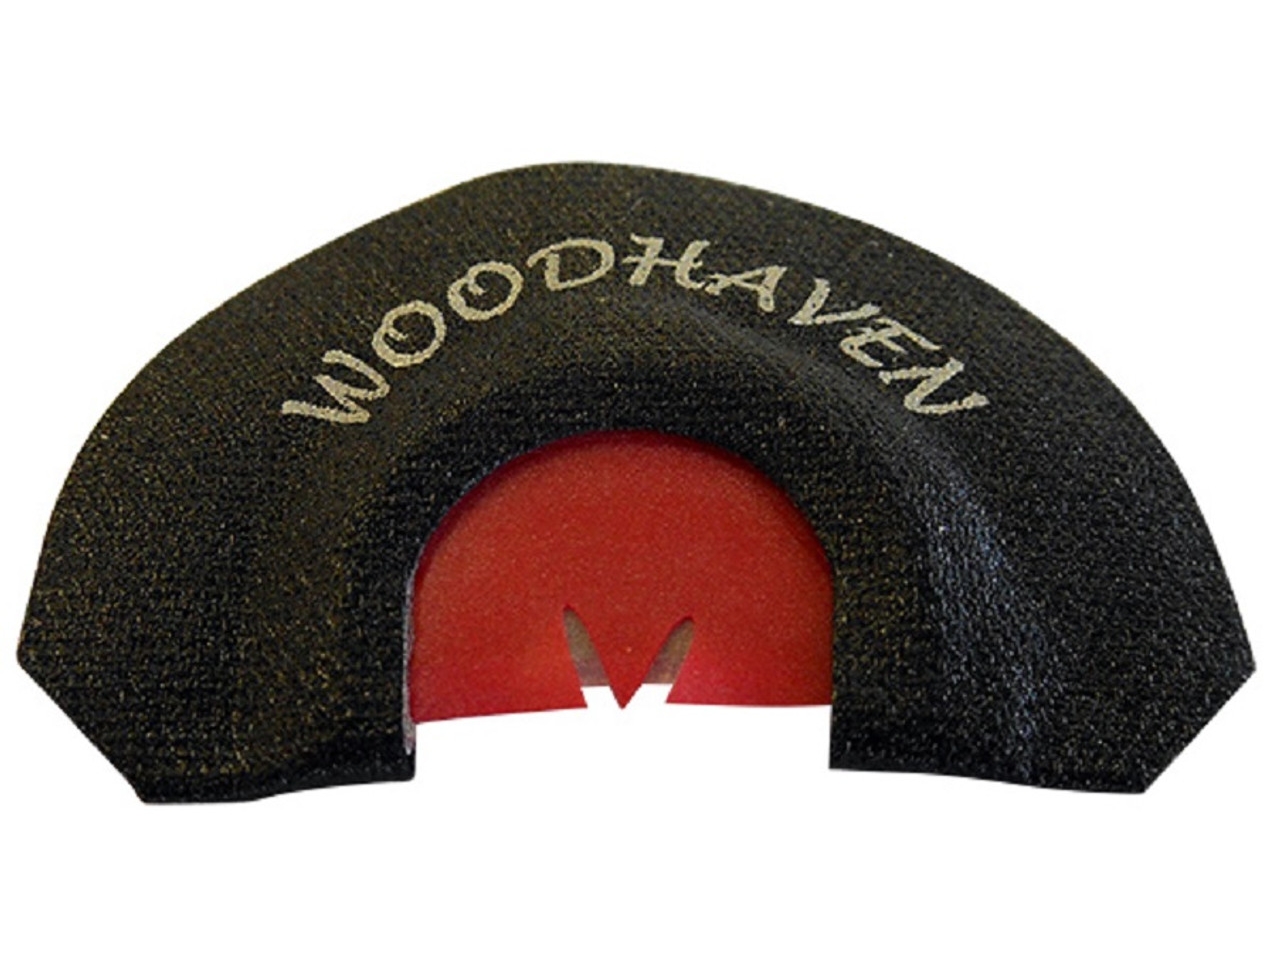 Woodhaven Black Wasp Diaphragm Turkey Mouth Call